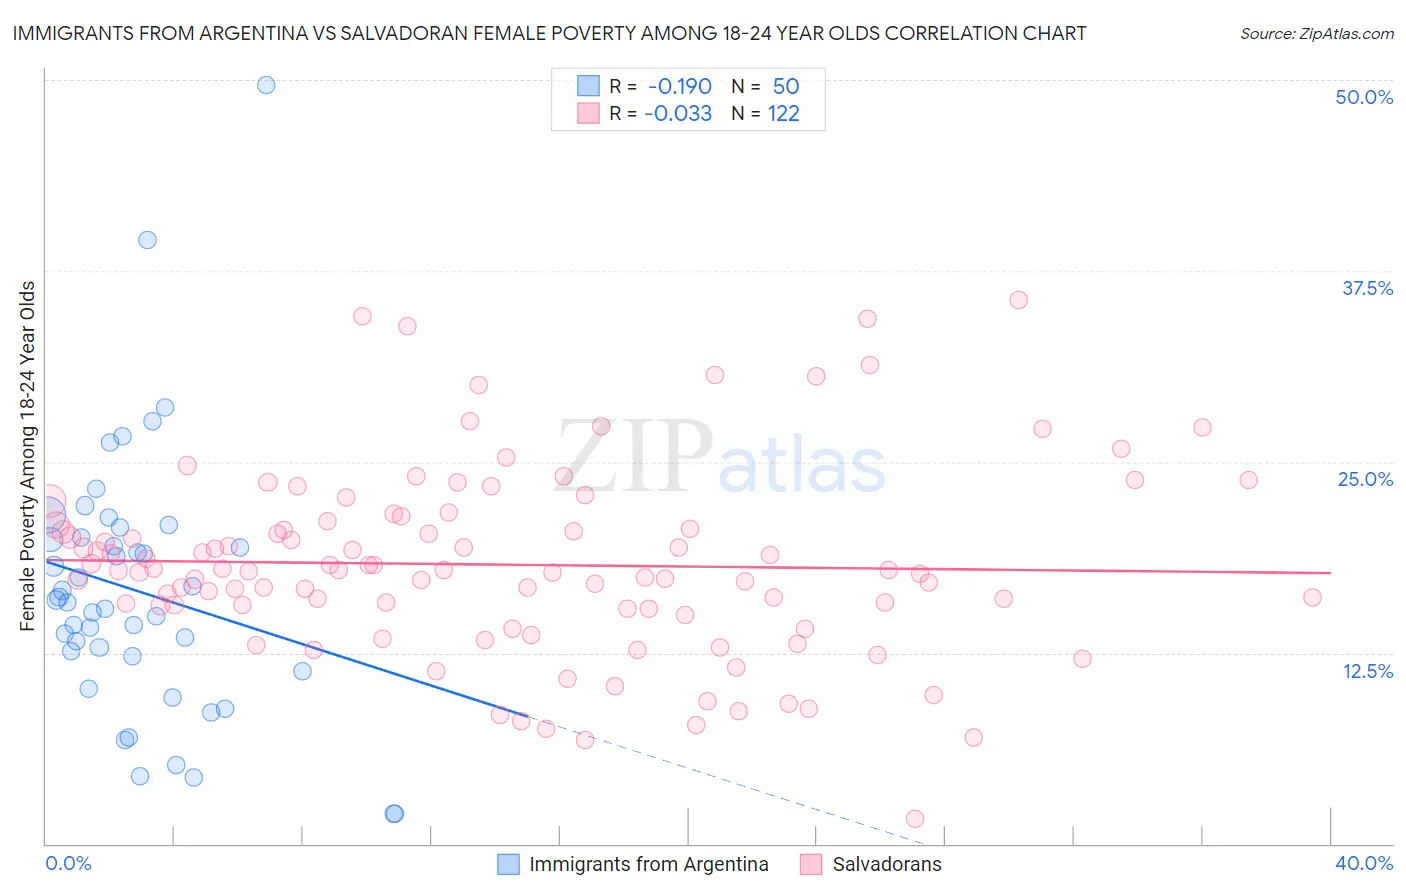 Immigrants from Argentina vs Salvadoran Female Poverty Among 18-24 Year Olds